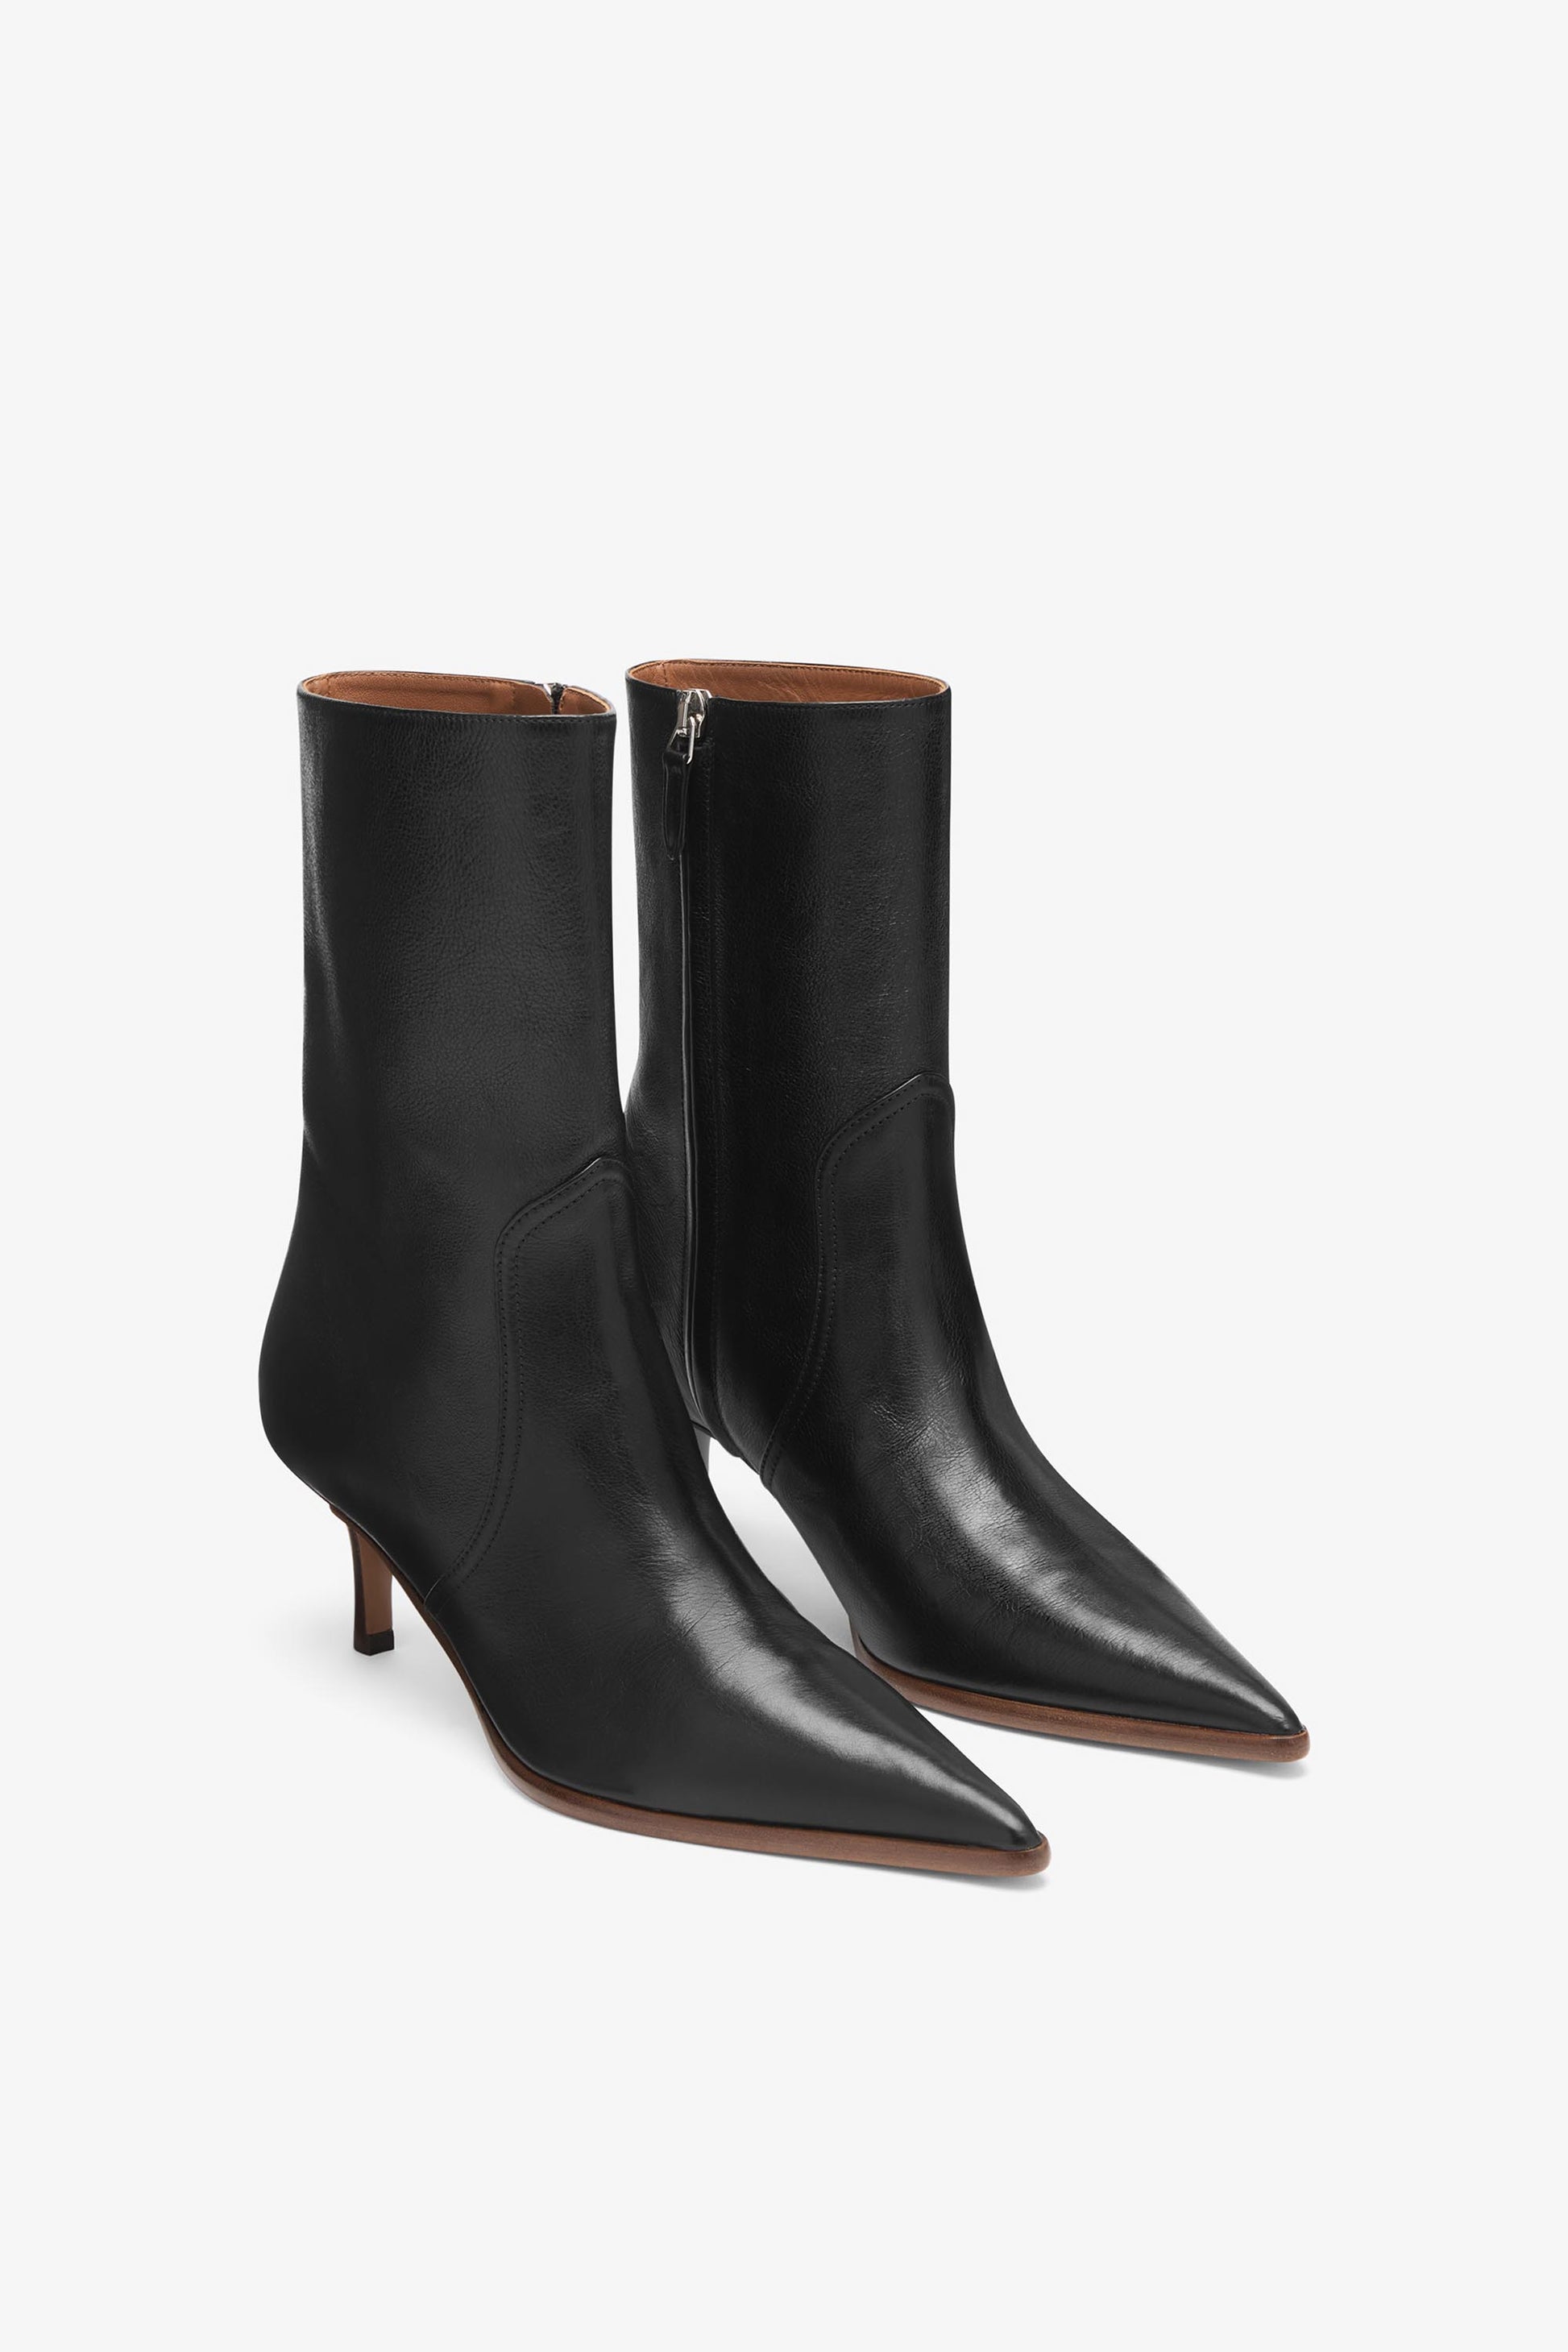 Black leather mid-calf boot